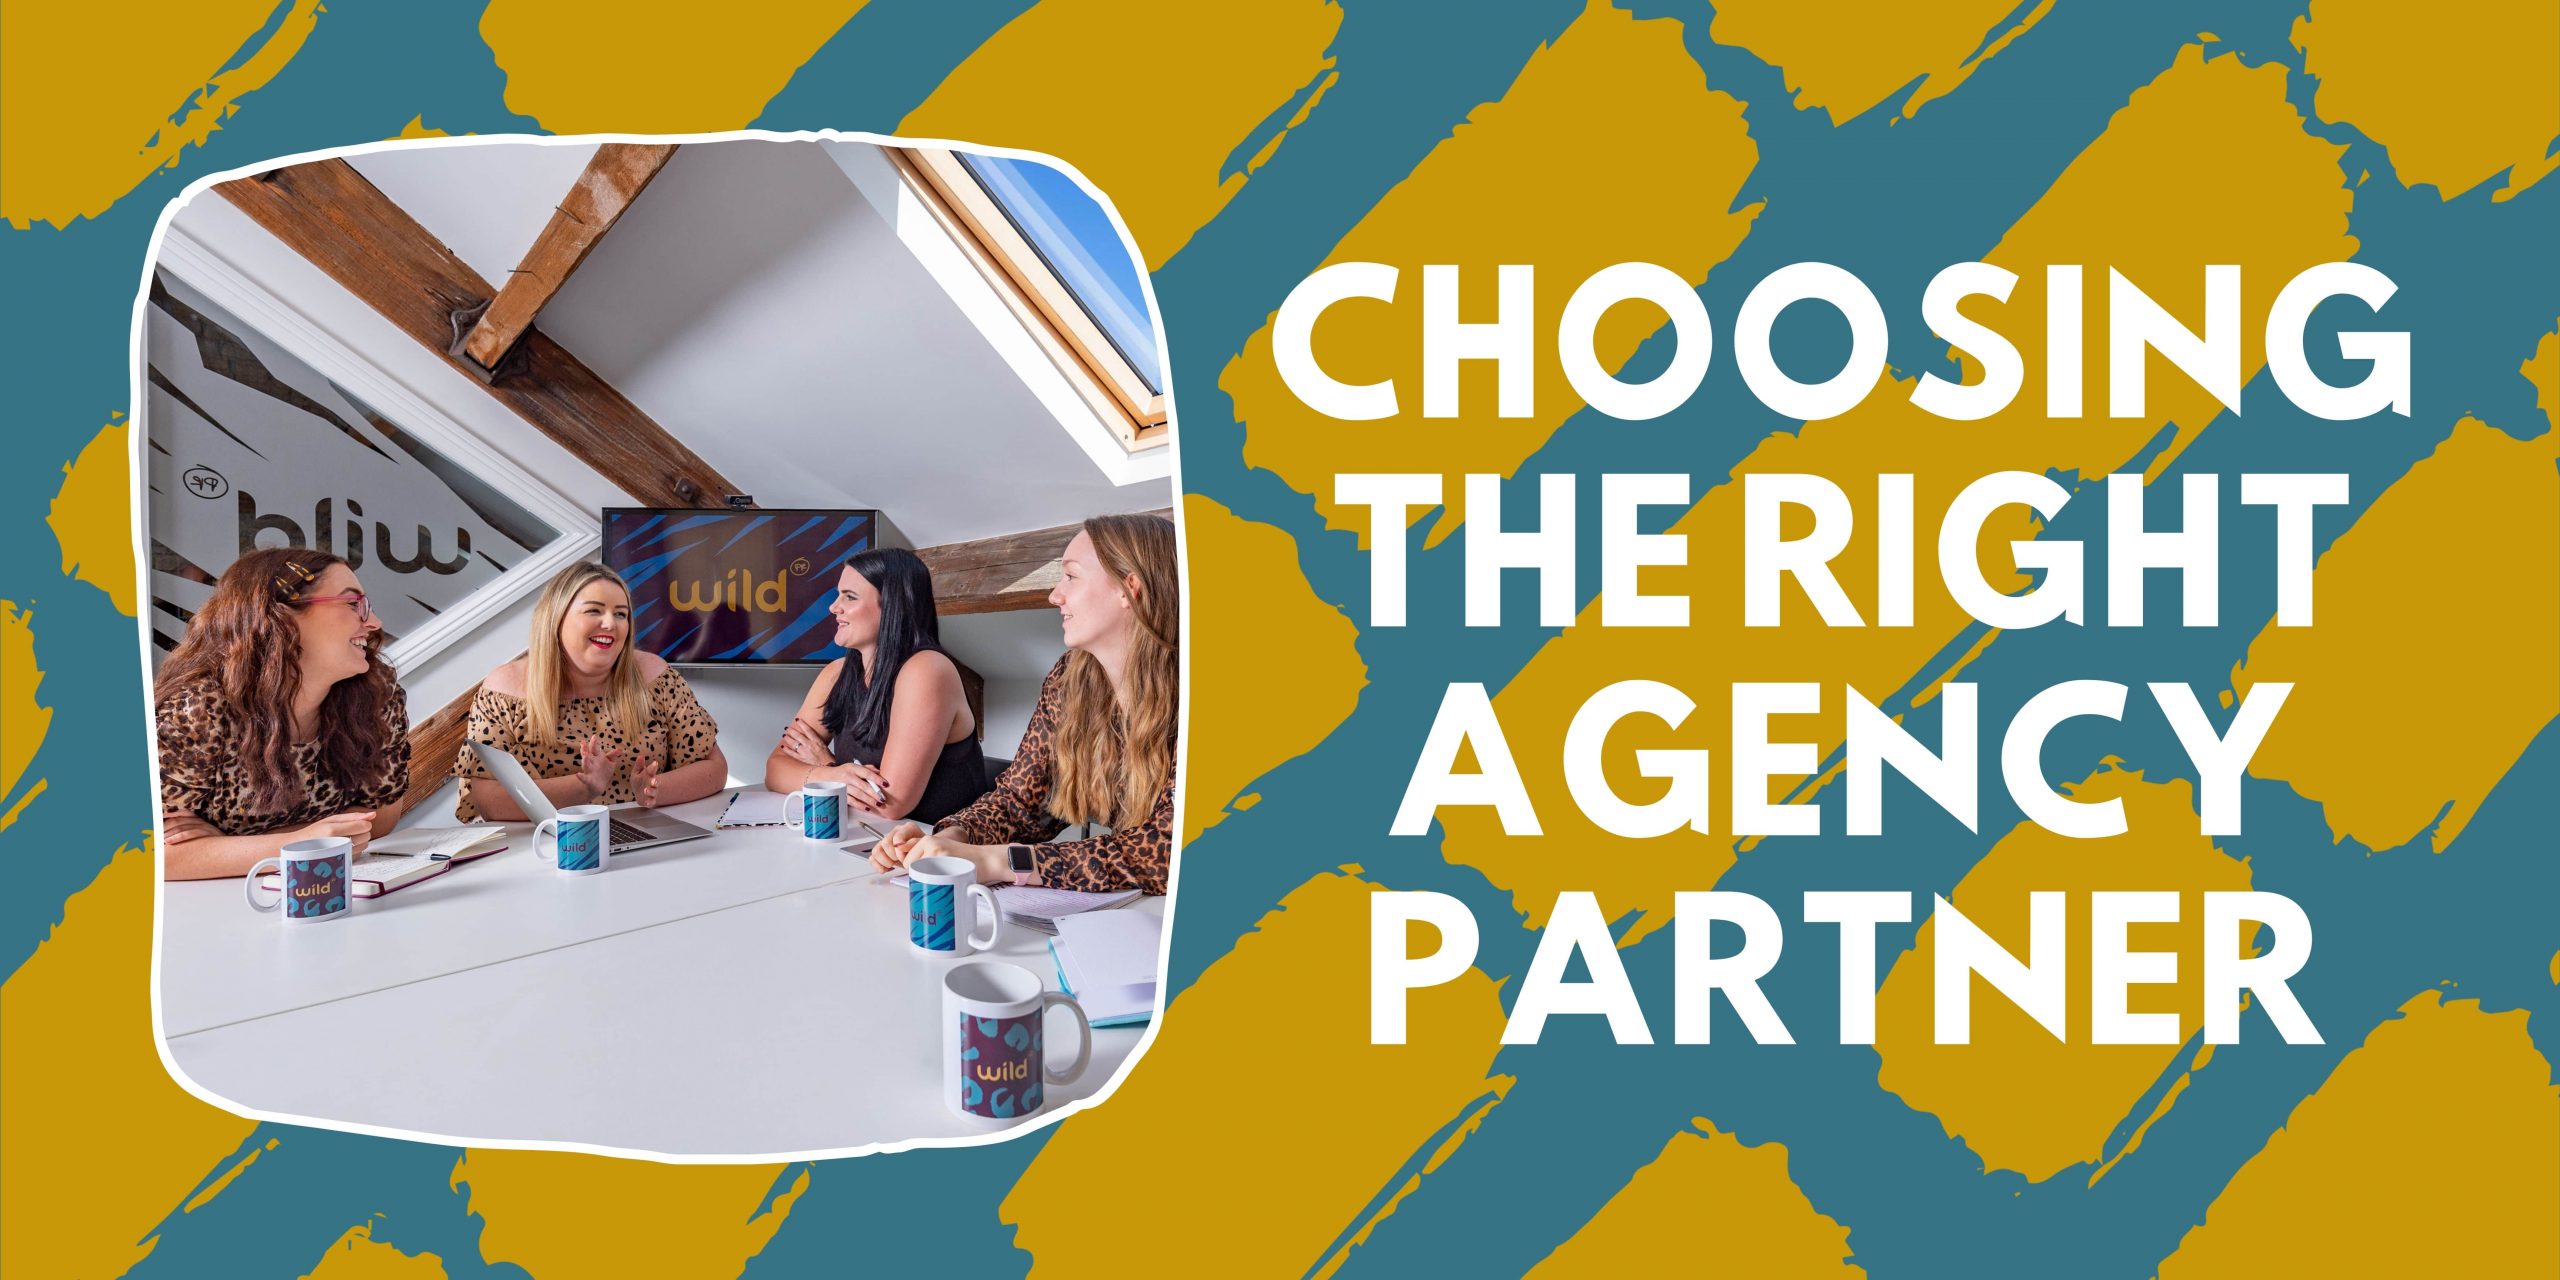 How to choose the right agency partner for your business